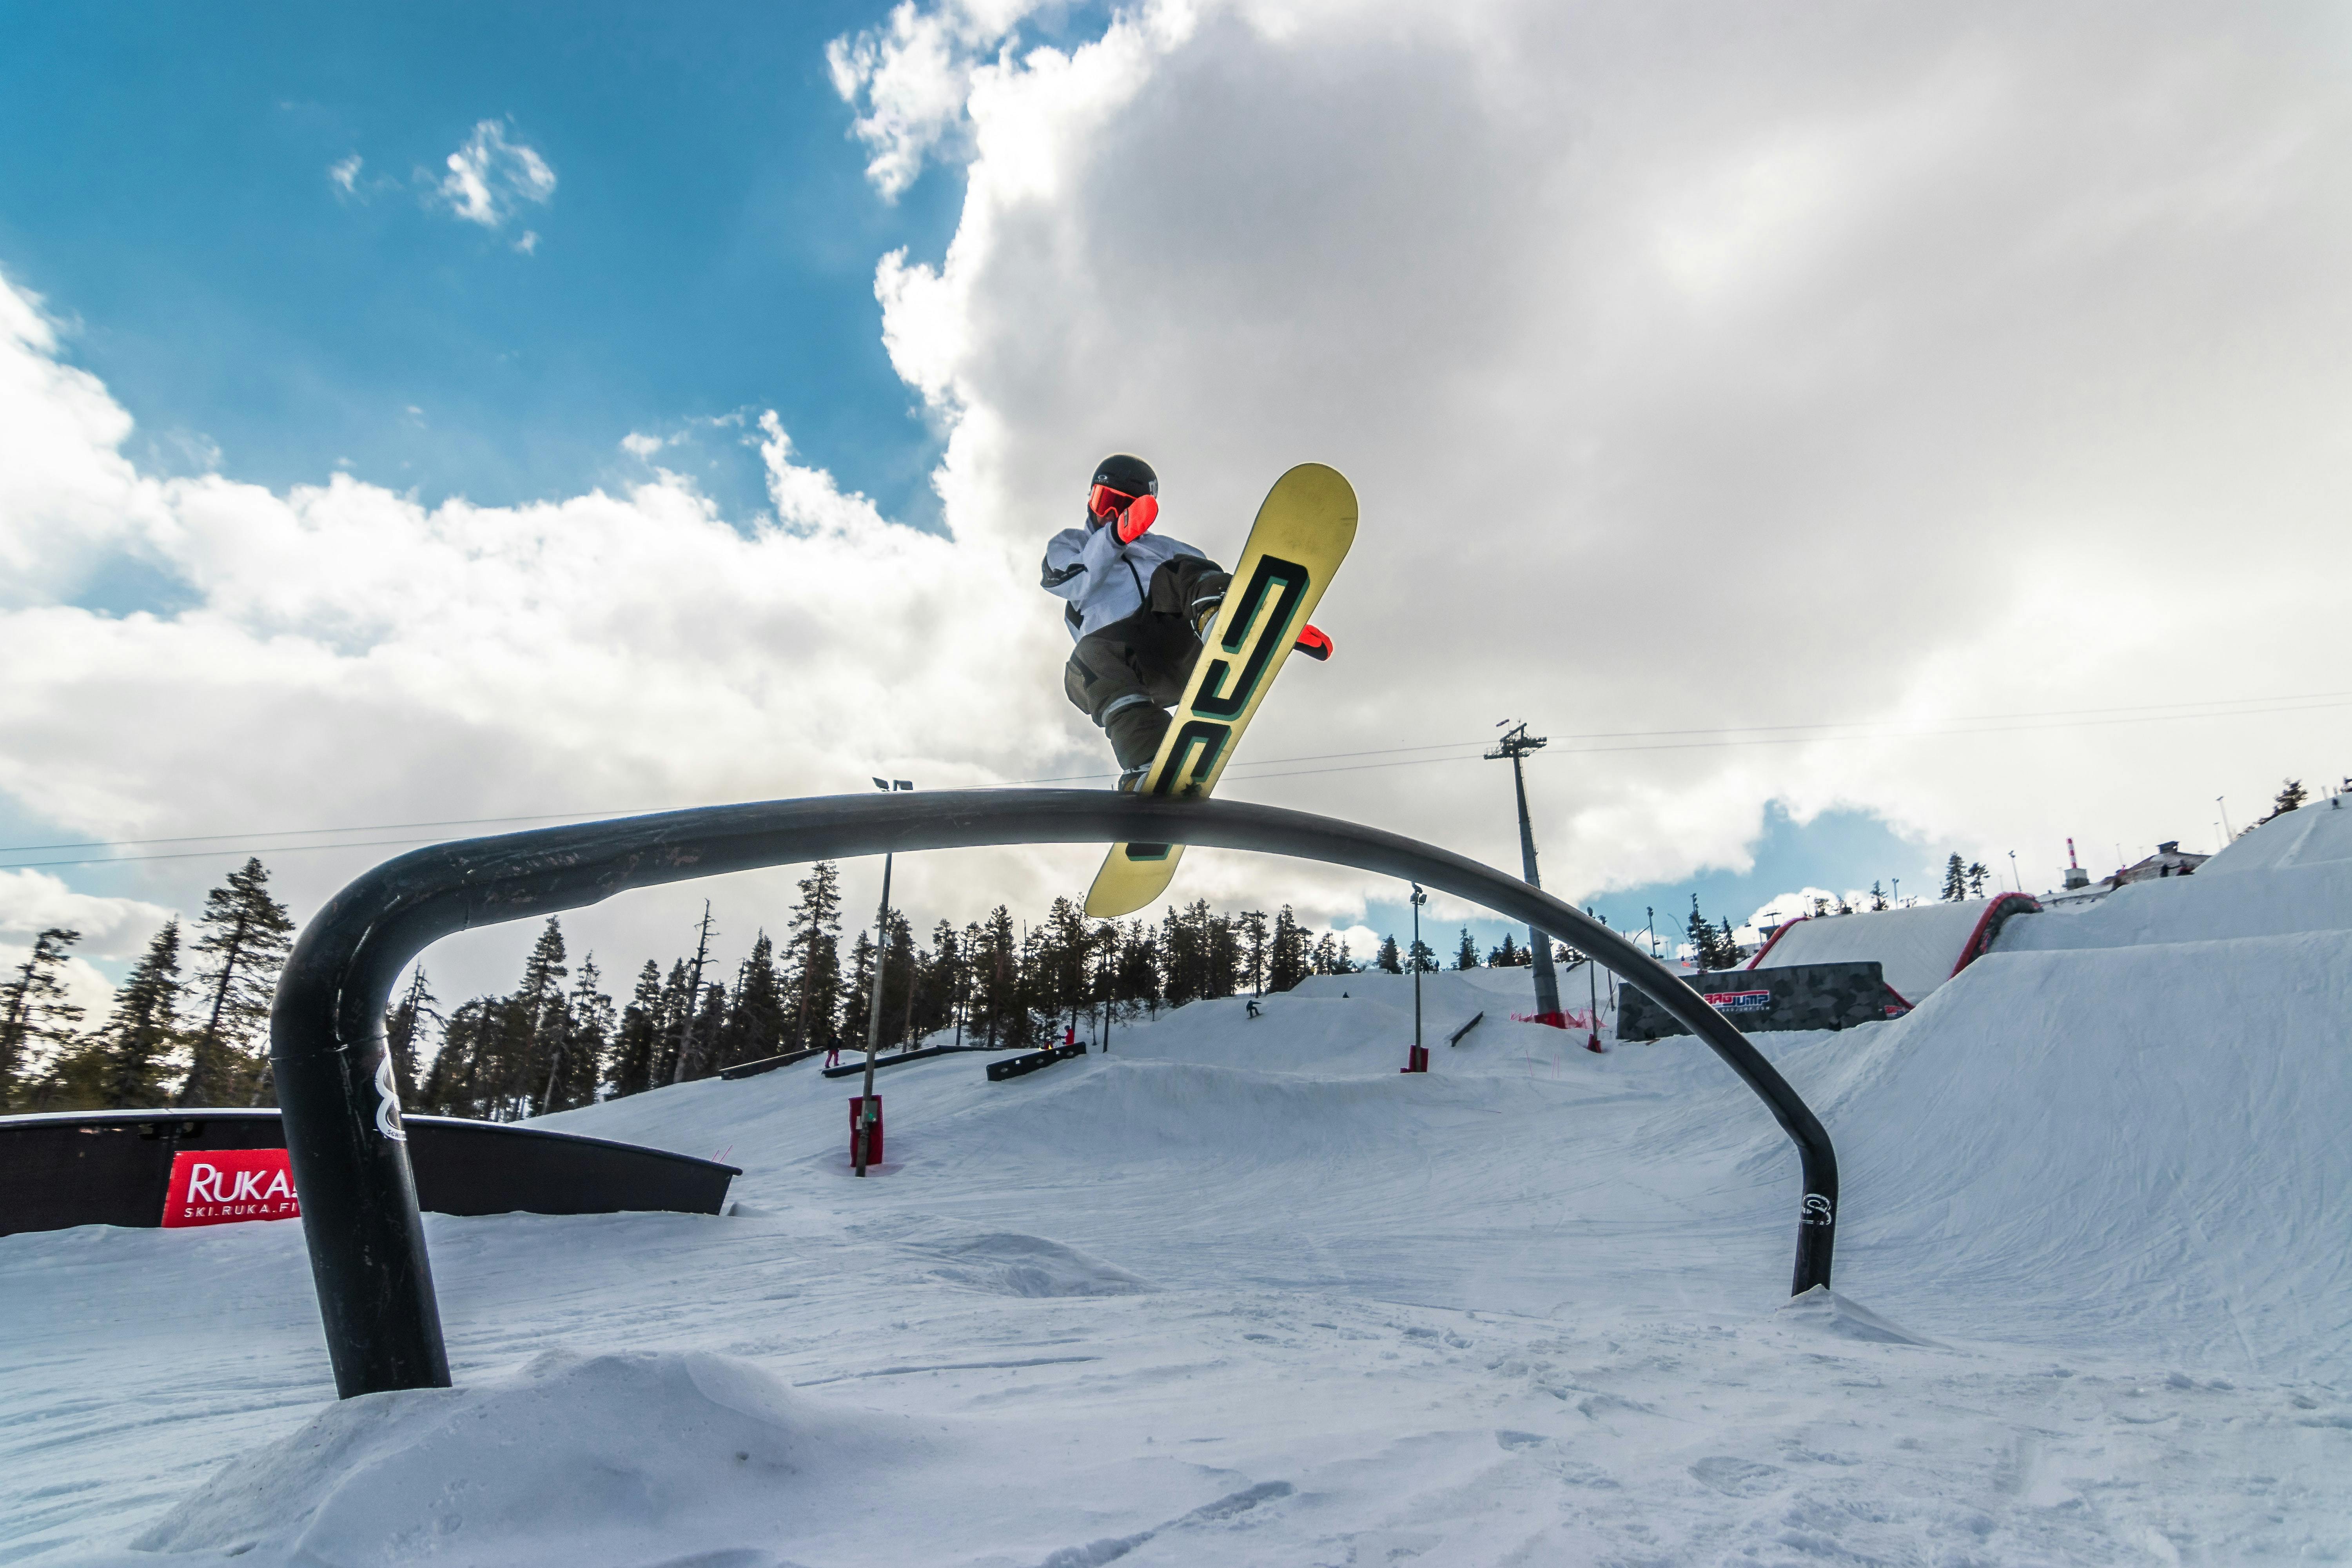 A snowboarder does a slide across a rail in a terrain park. His board is yellow and it is sunny.